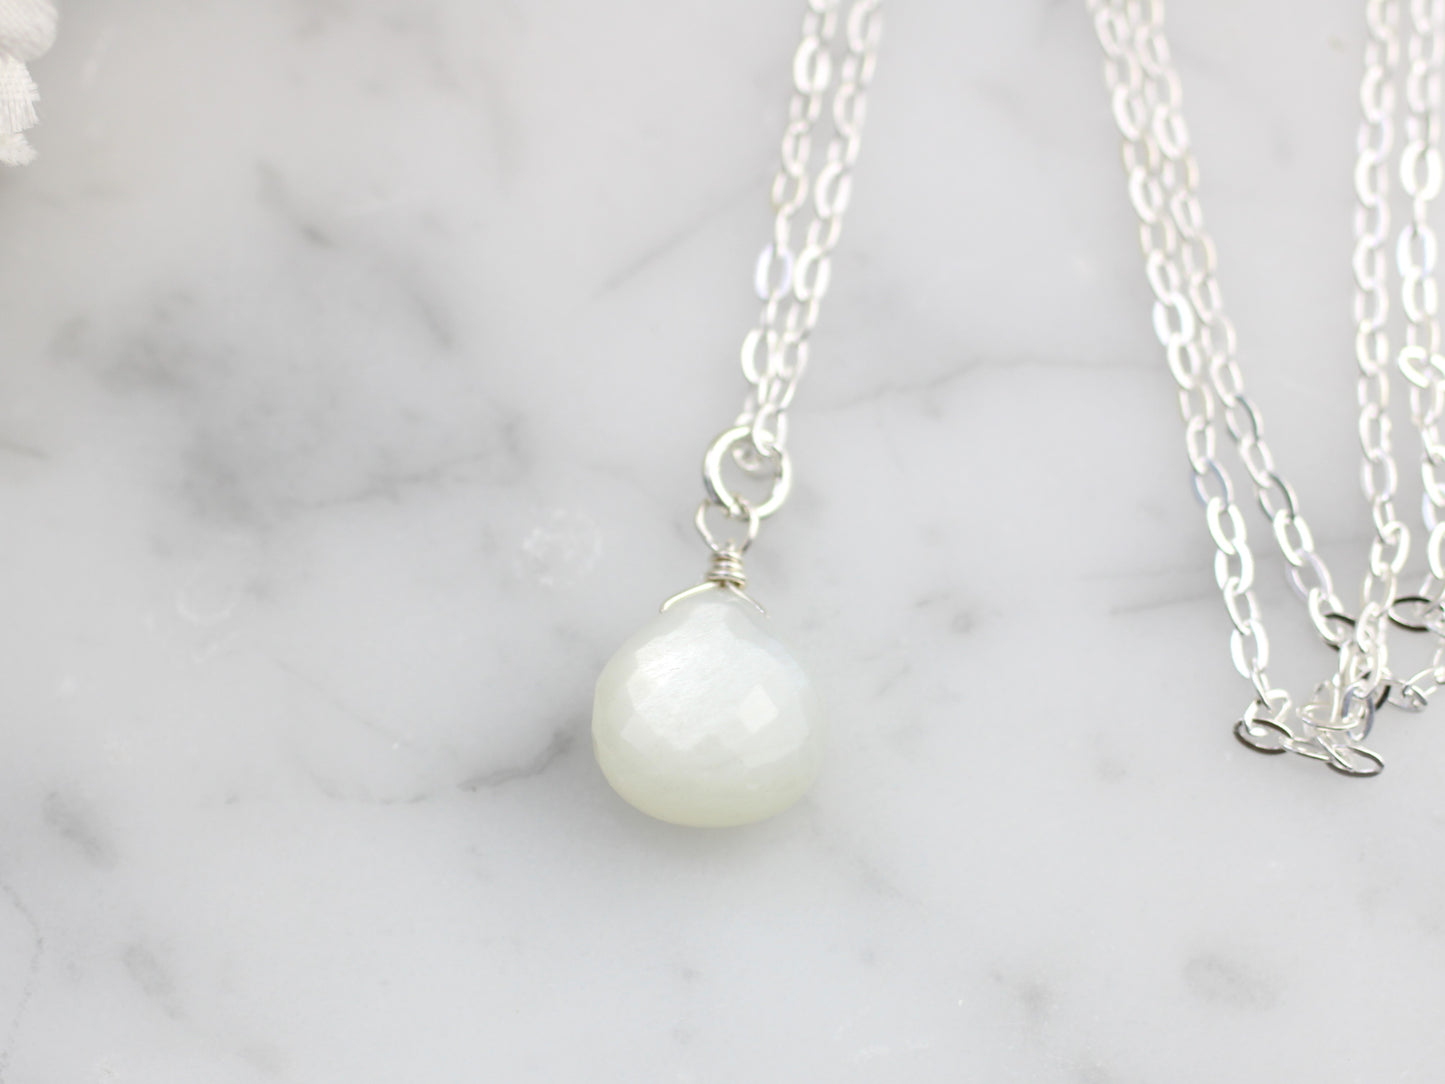 Moonstone gemstone necklace in silver or gold.